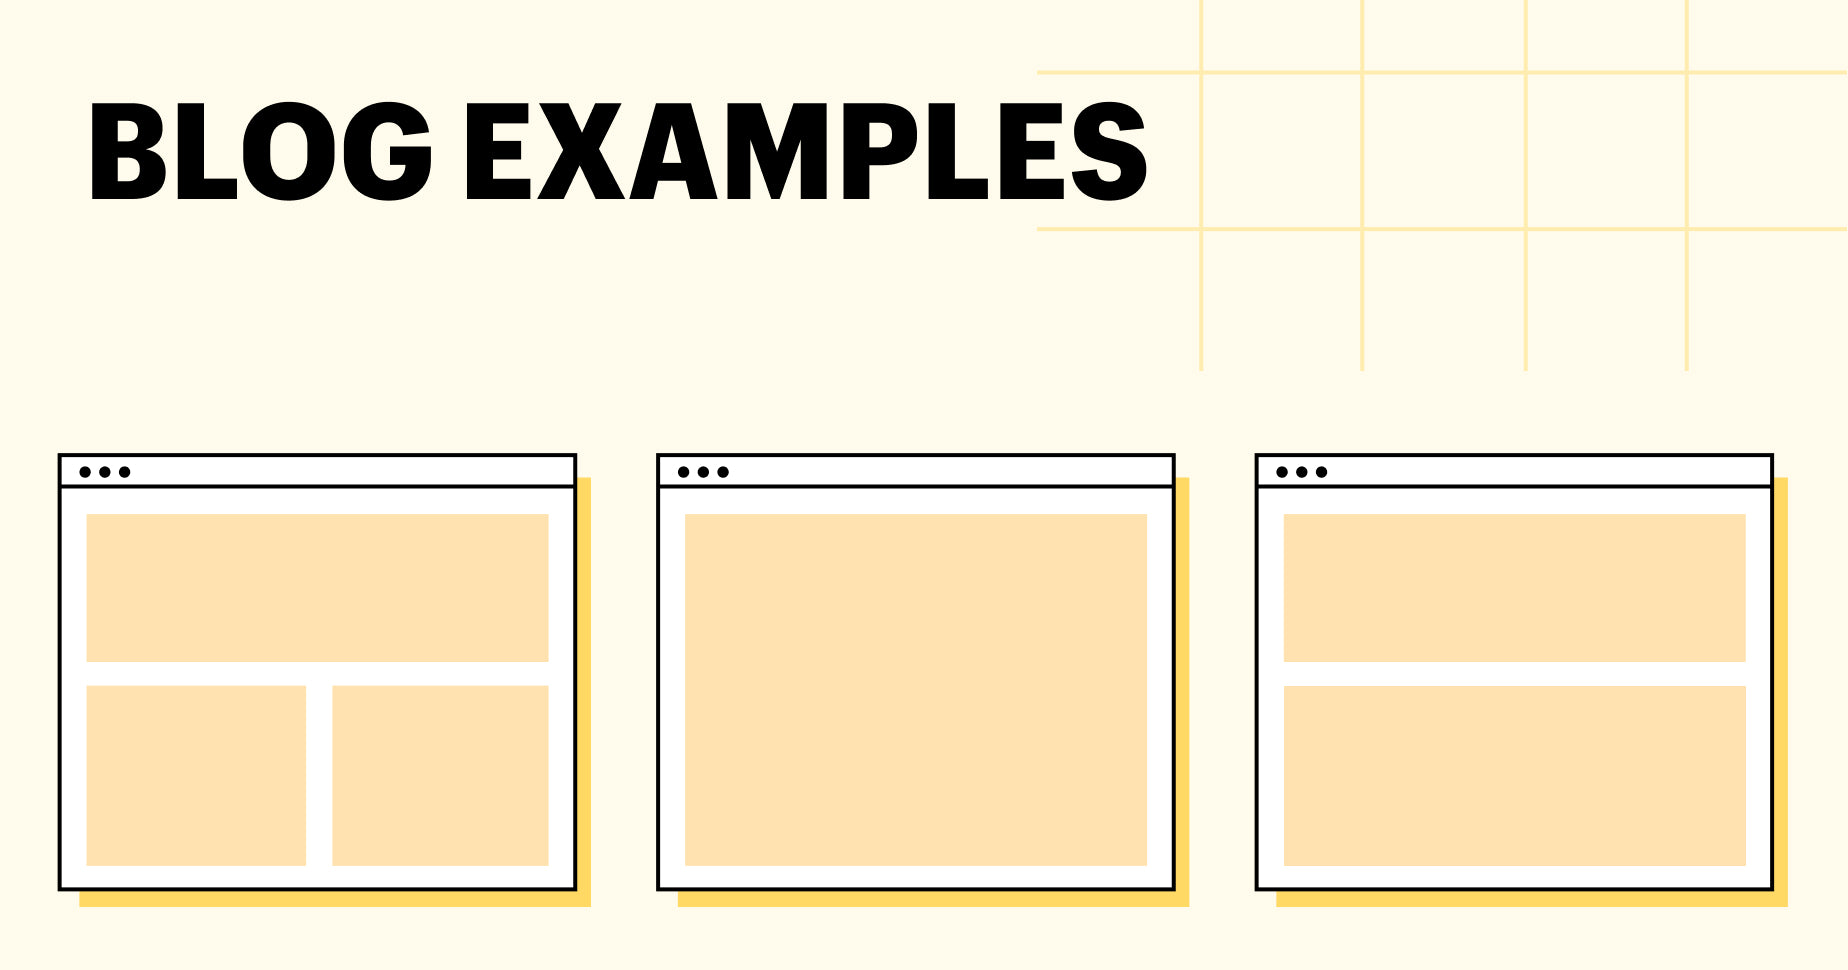 Blog examples